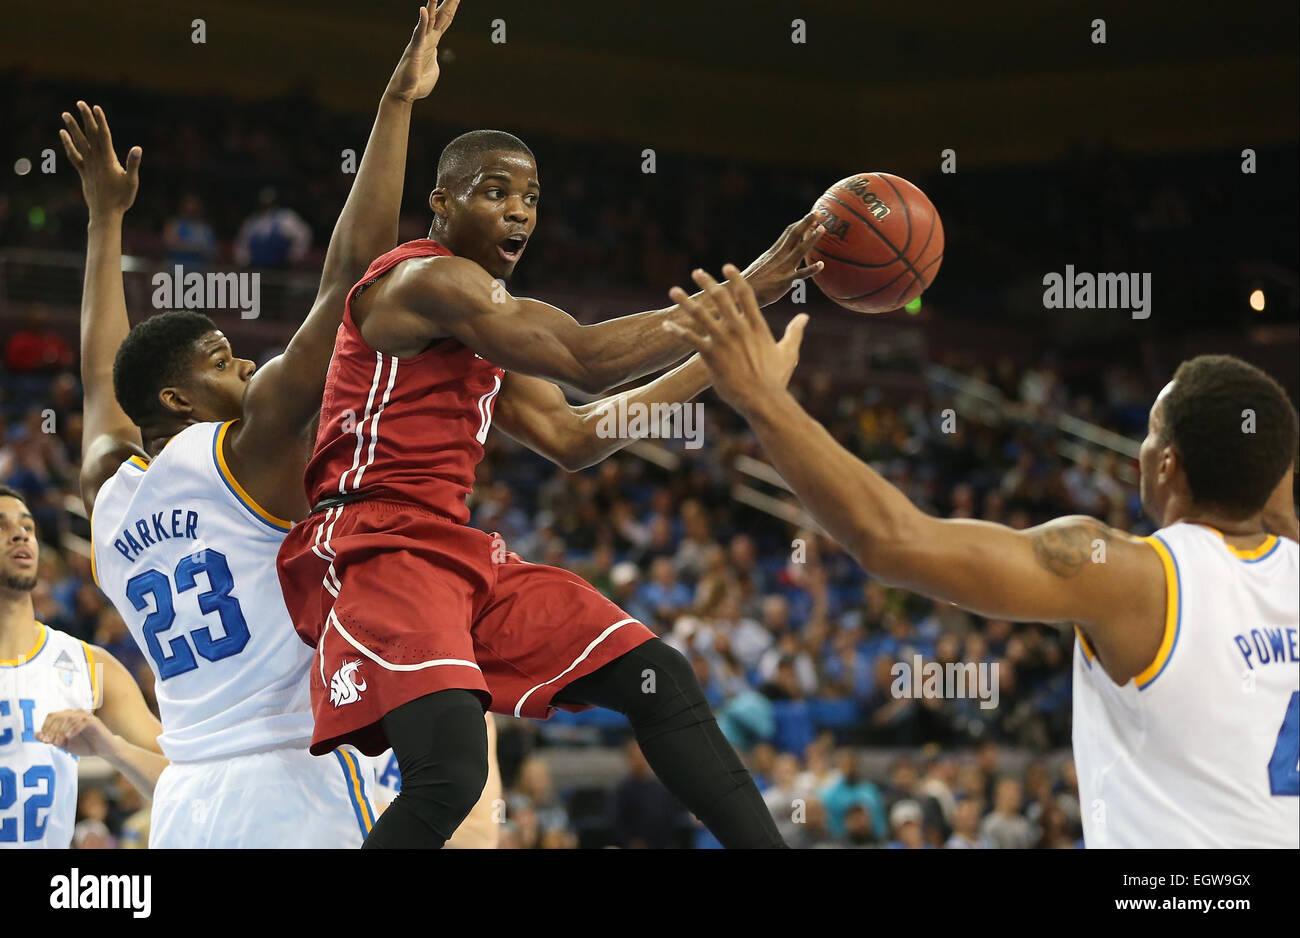 March 1, 2015: Washington State Cougars and UCLA Bruins, Pauley Pavilion in Los Angeles, CA. WSU guard Ike Iroegbu #0 cuts down the lane but decides to dish it after running into UCLA center Tony Parker #23. Stock Photo